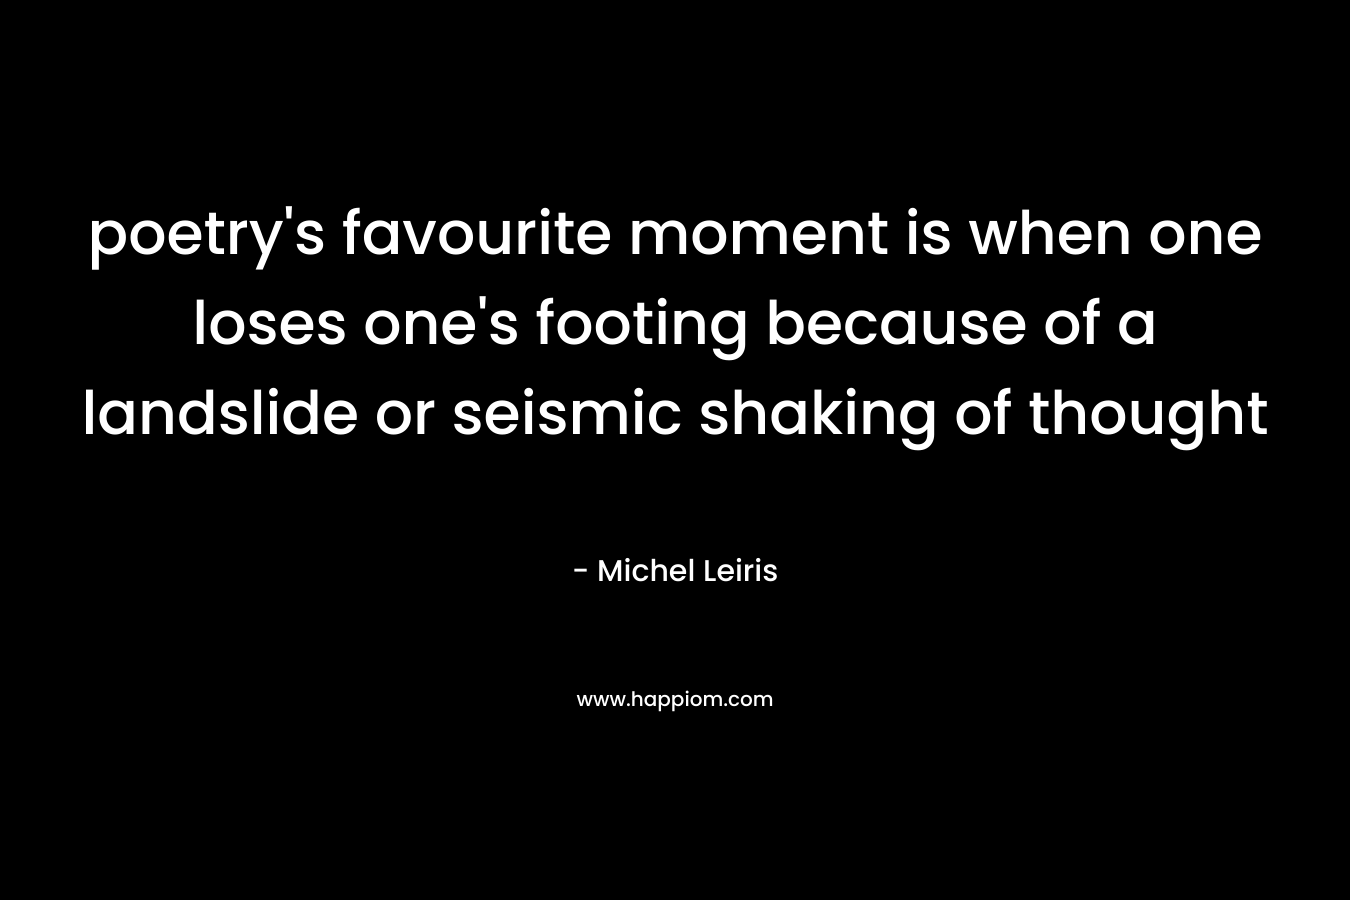 poetry’s favourite moment is when one loses one’s footing because of a landslide or seismic shaking of thought – Michel Leiris